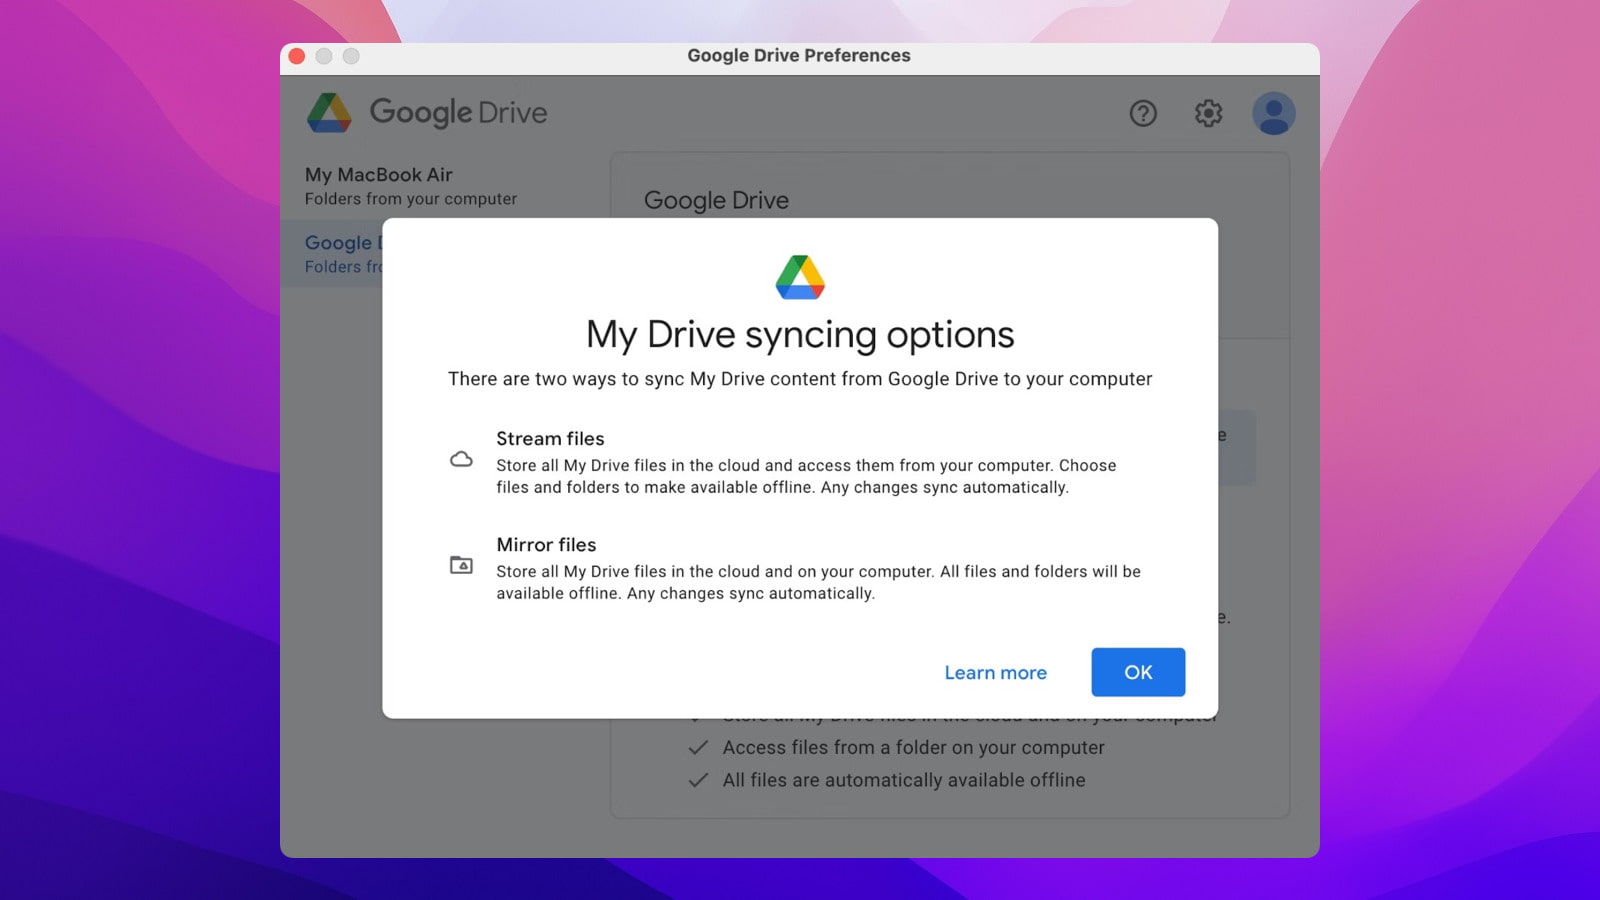 A big plus of Google Drive is instant synchronization with all your devices.